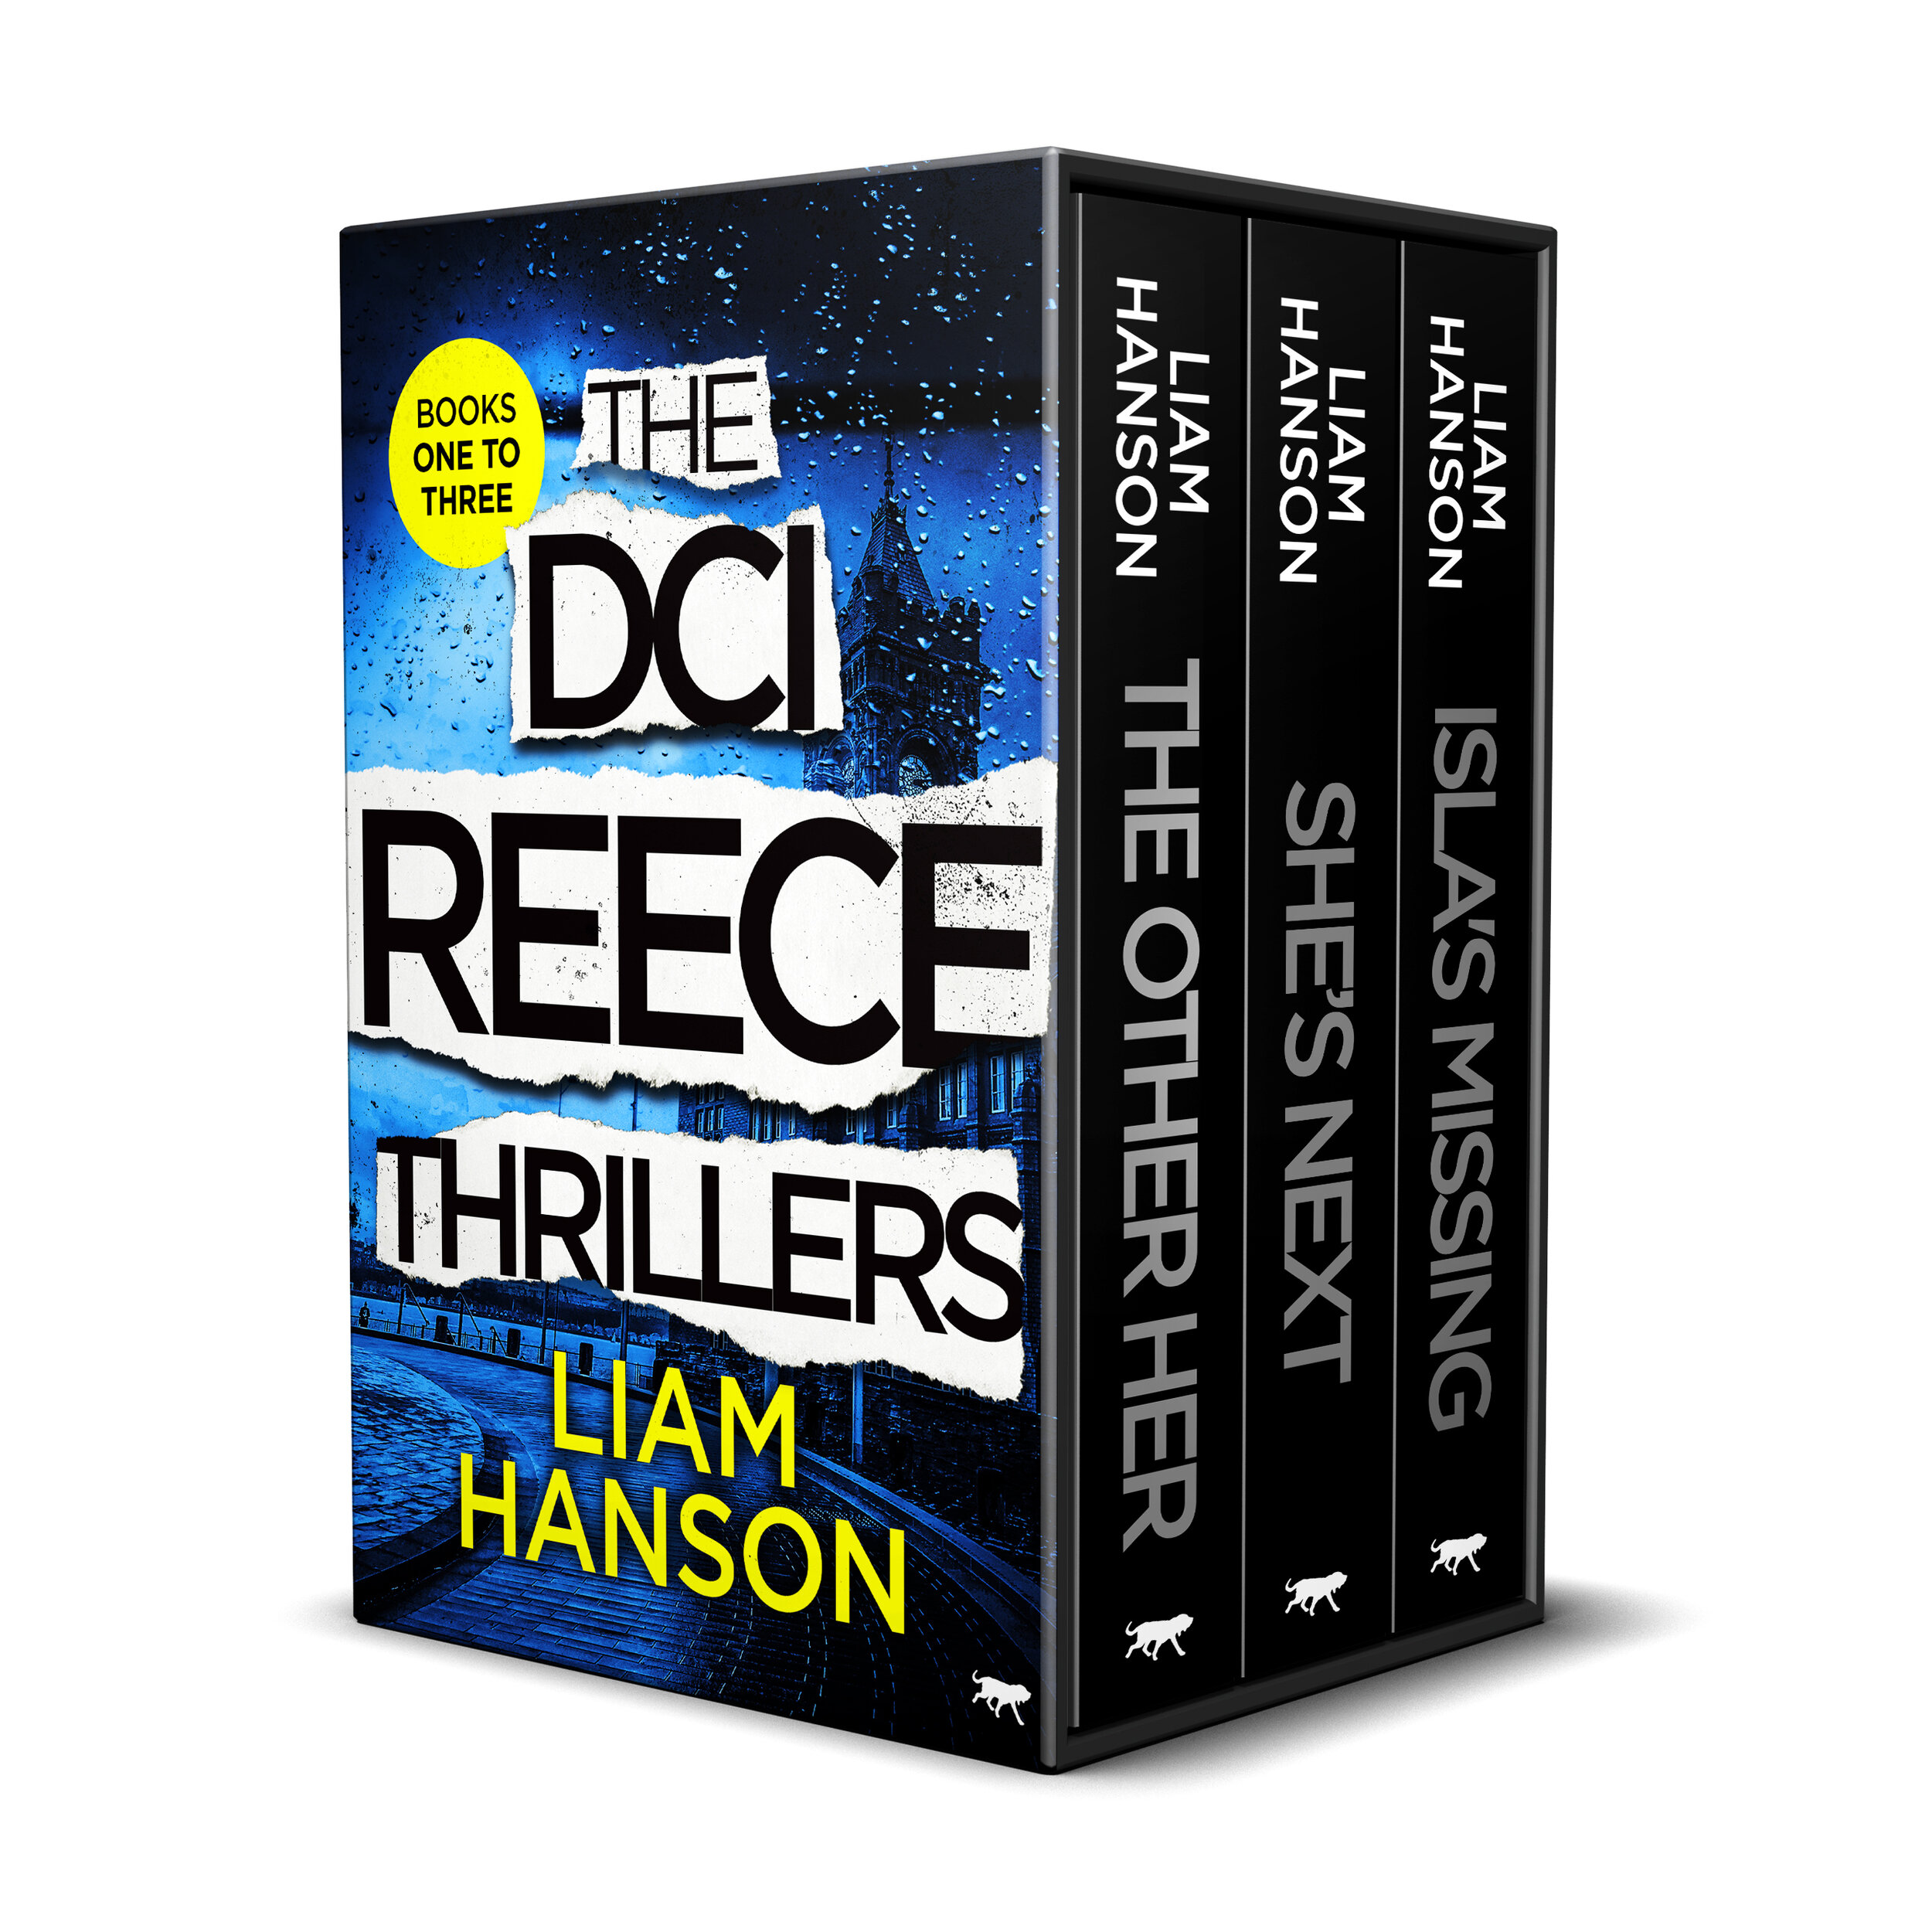 Liam Hanson - The DCI Reece Thrillers_boxset_high res.jpg